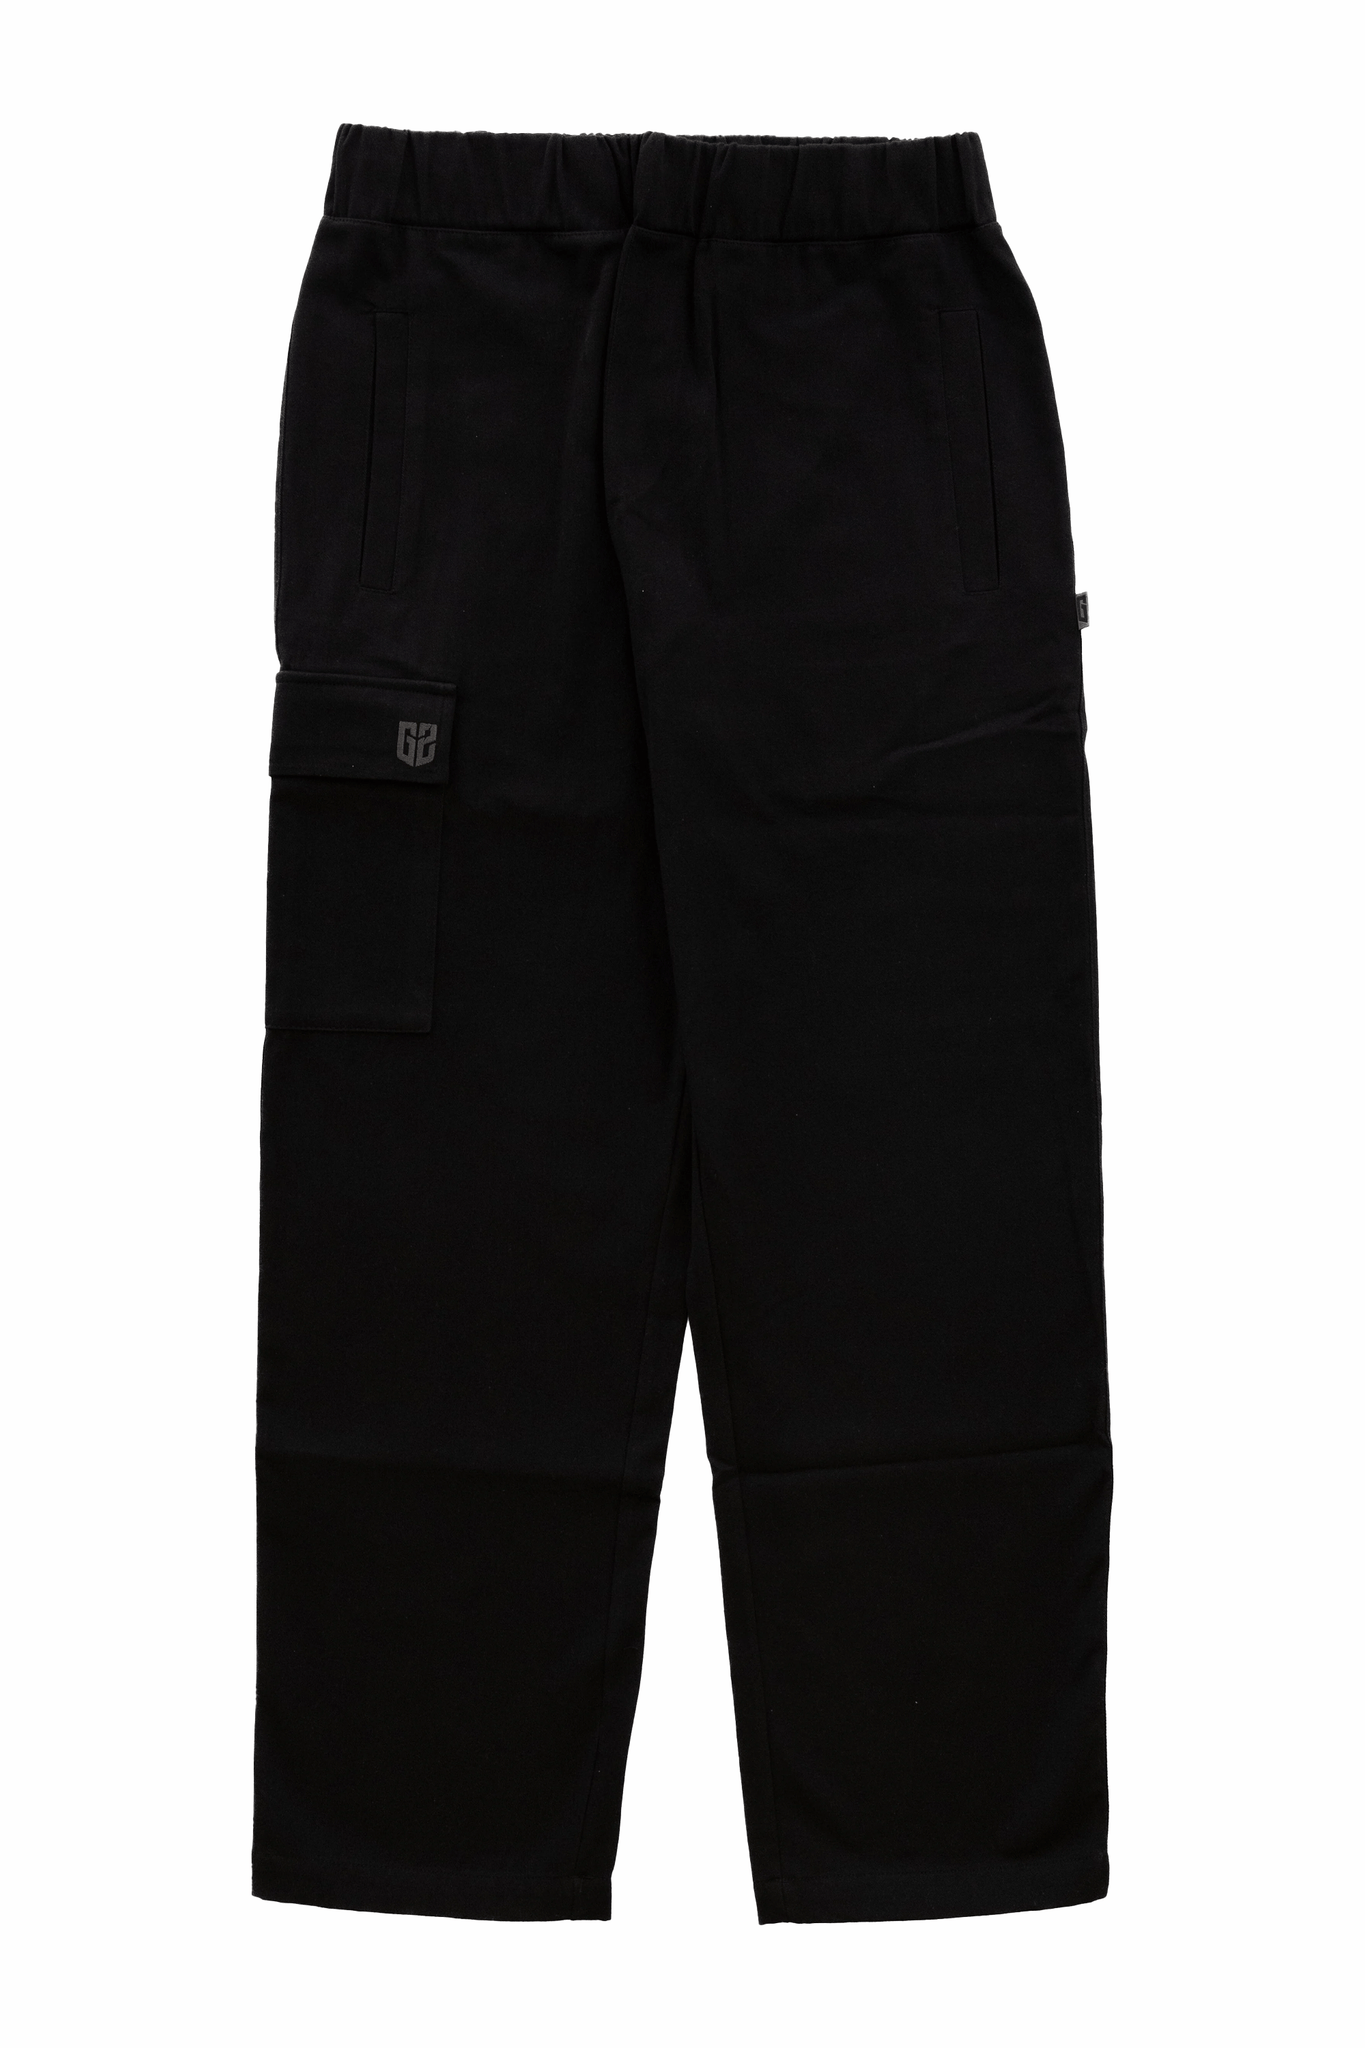 G2 FW22 black cargo pants, a blend of style and utility. Elevate your look with these versatile and trendy cargo pants